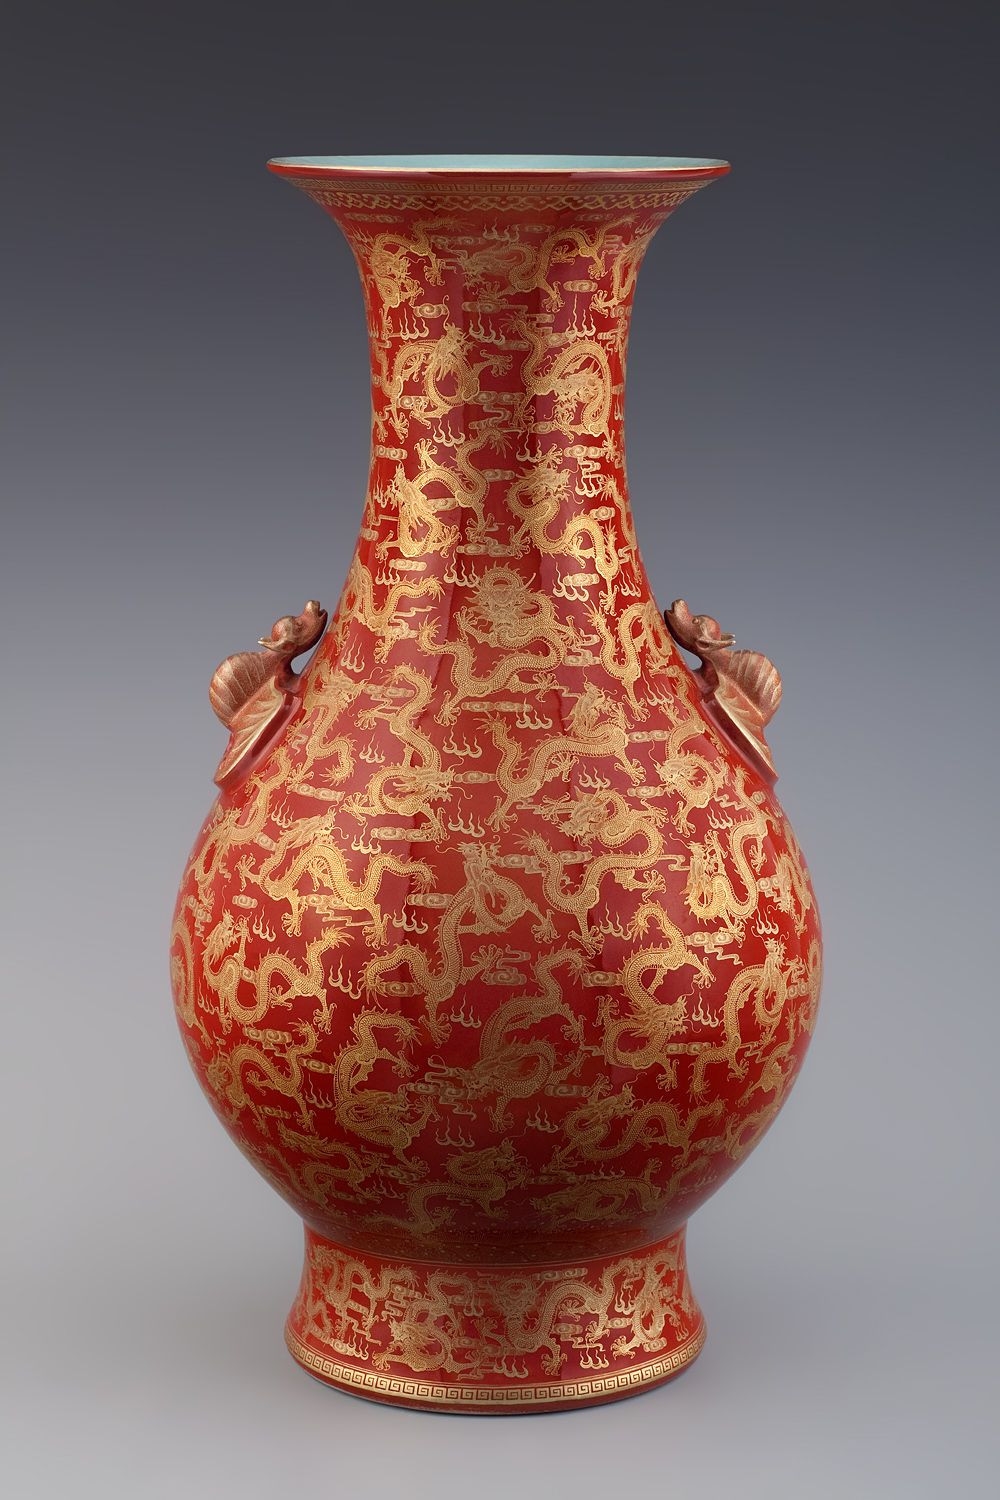 22 Cute orange Ceramic Vase 2024 free download orange ceramic vase of pin by ic280 on ancient china pinterest ancient china and pottery intended for 8ecc0db878825d66fb41bfba7a47df2f